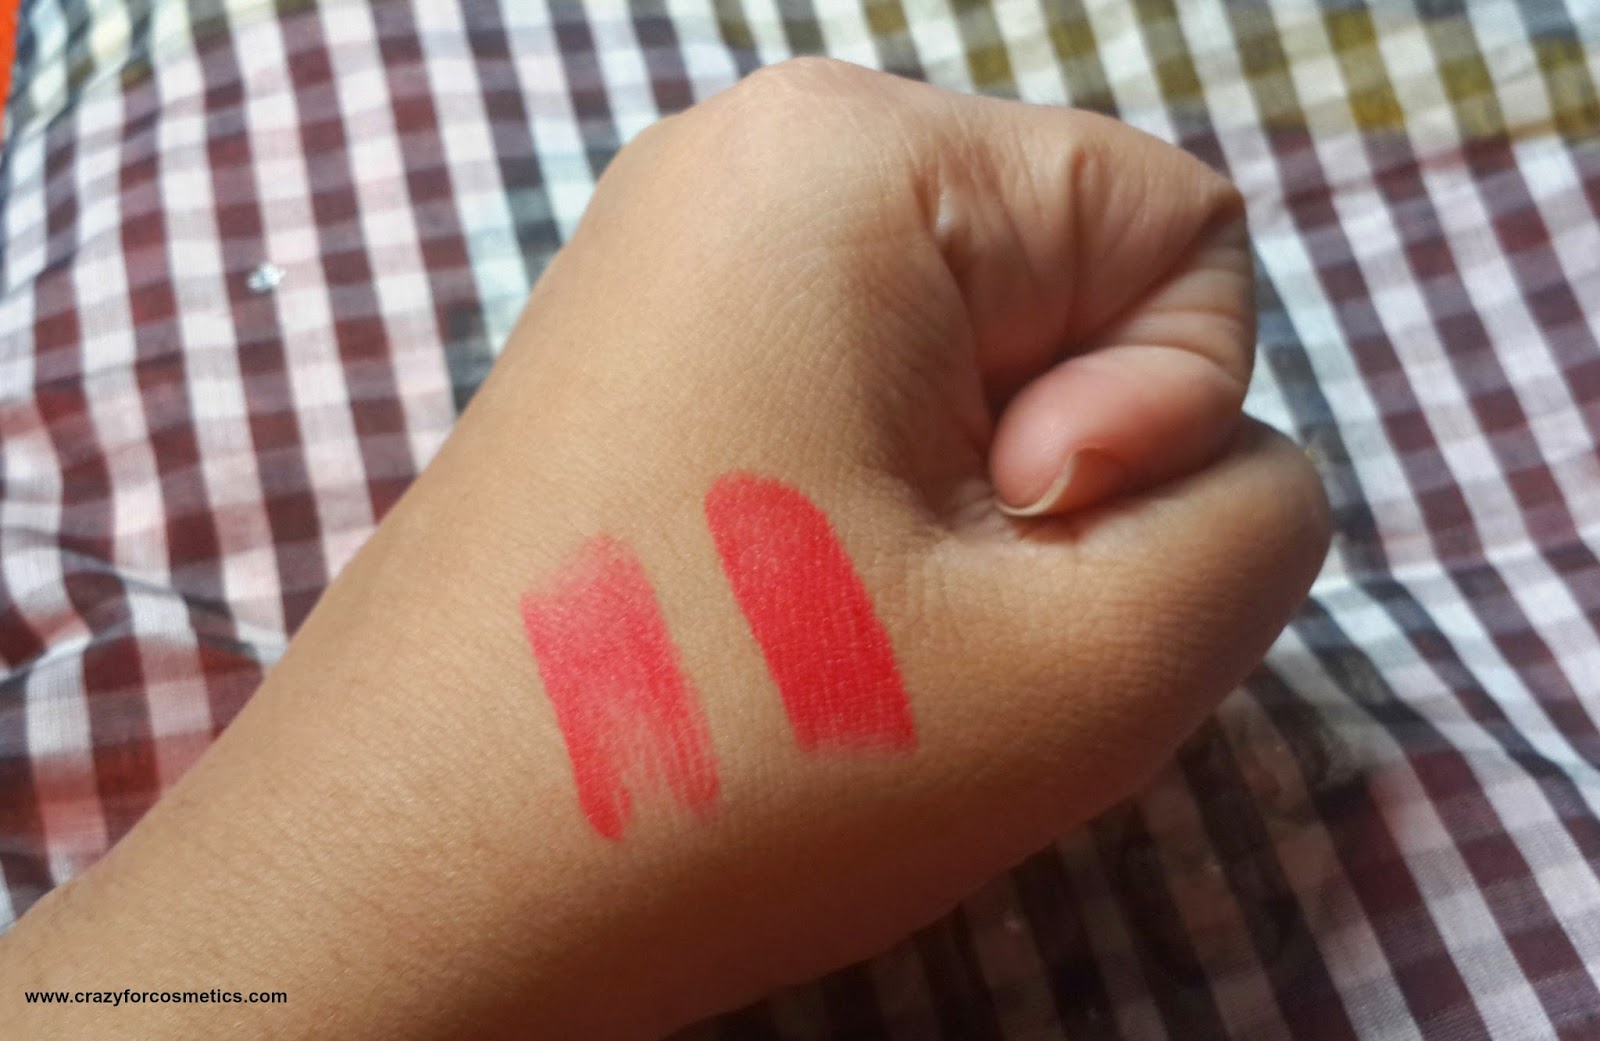 Loreal Moist Matte Lincoln rose lipstick swatch & review